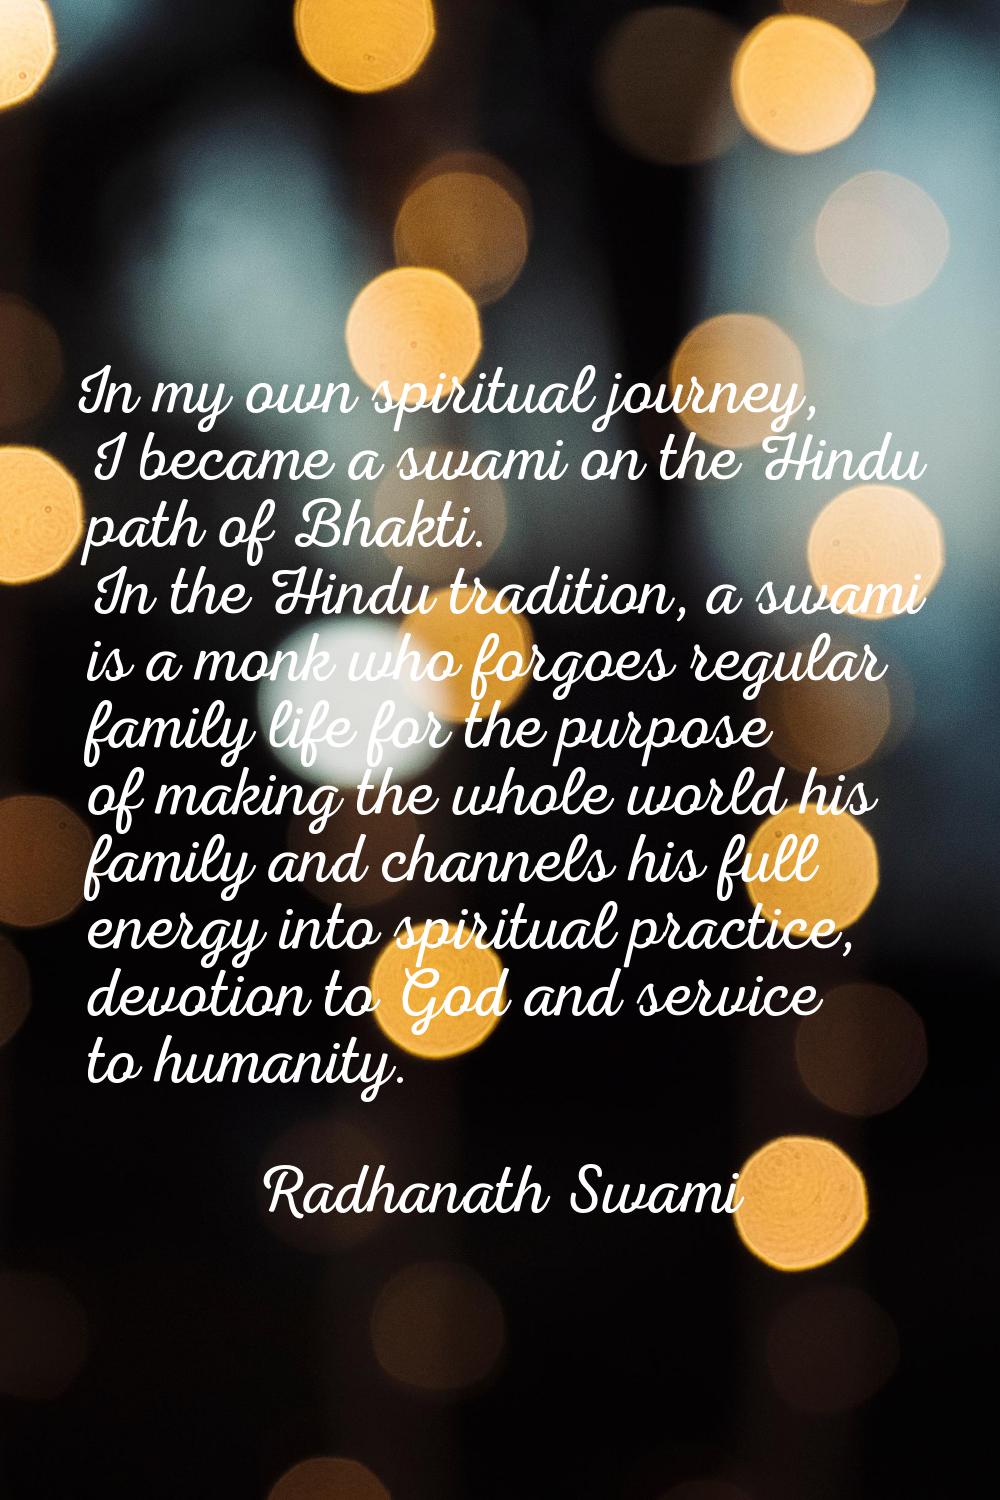 In my own spiritual journey, I became a swami on the Hindu path of Bhakti. In the Hindu tradition, 